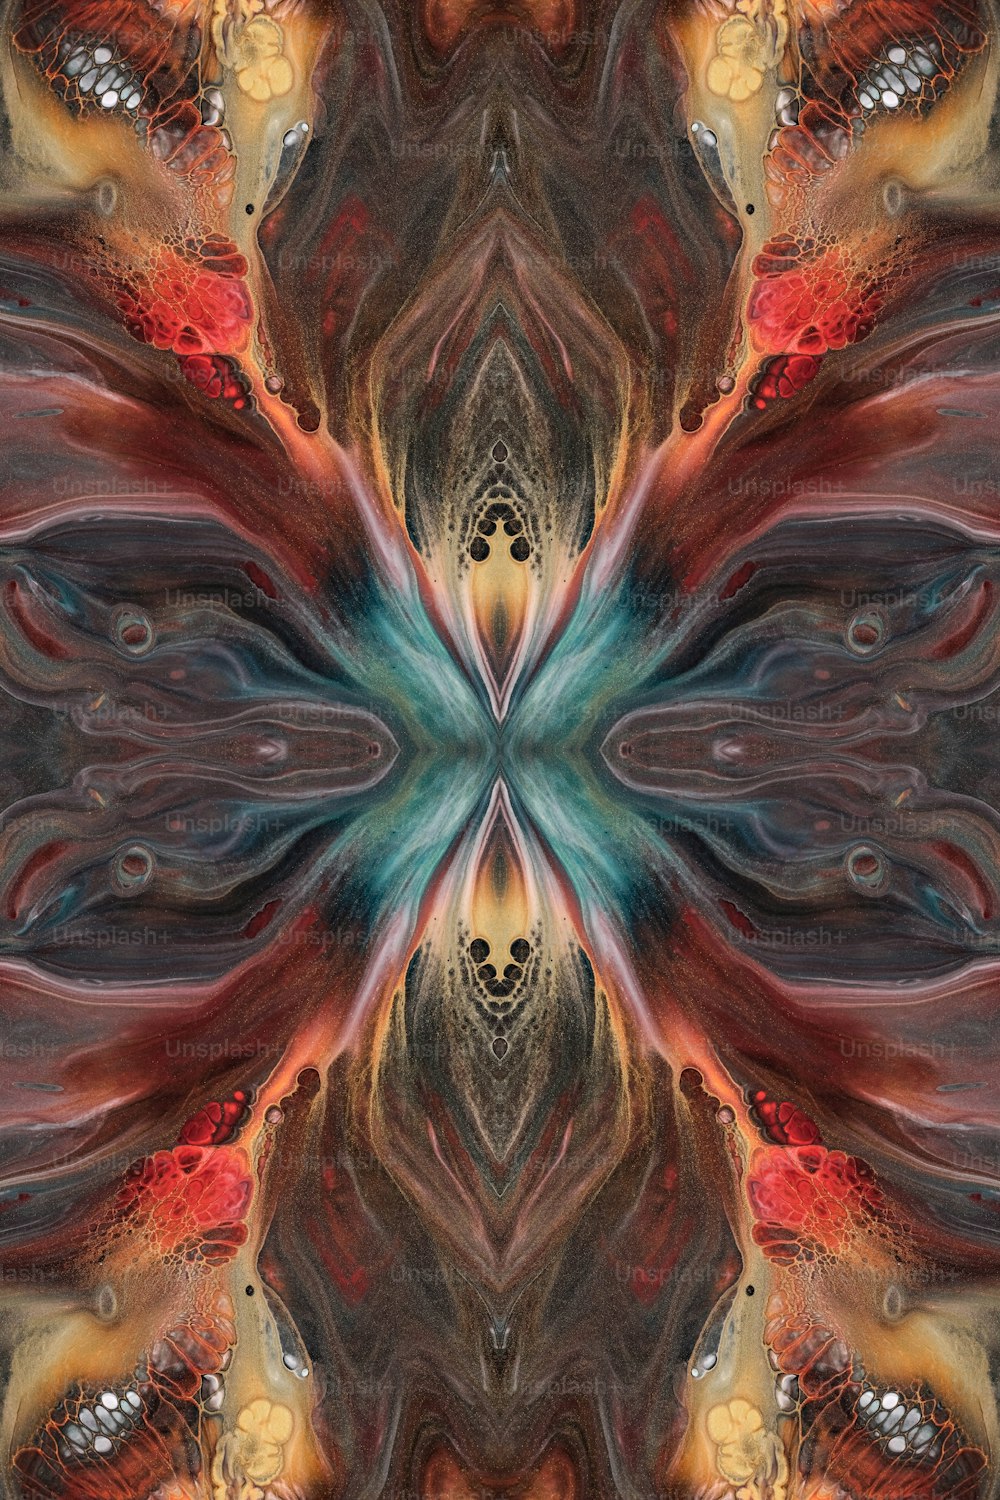 an abstract image of a flower in red, orange, and blue